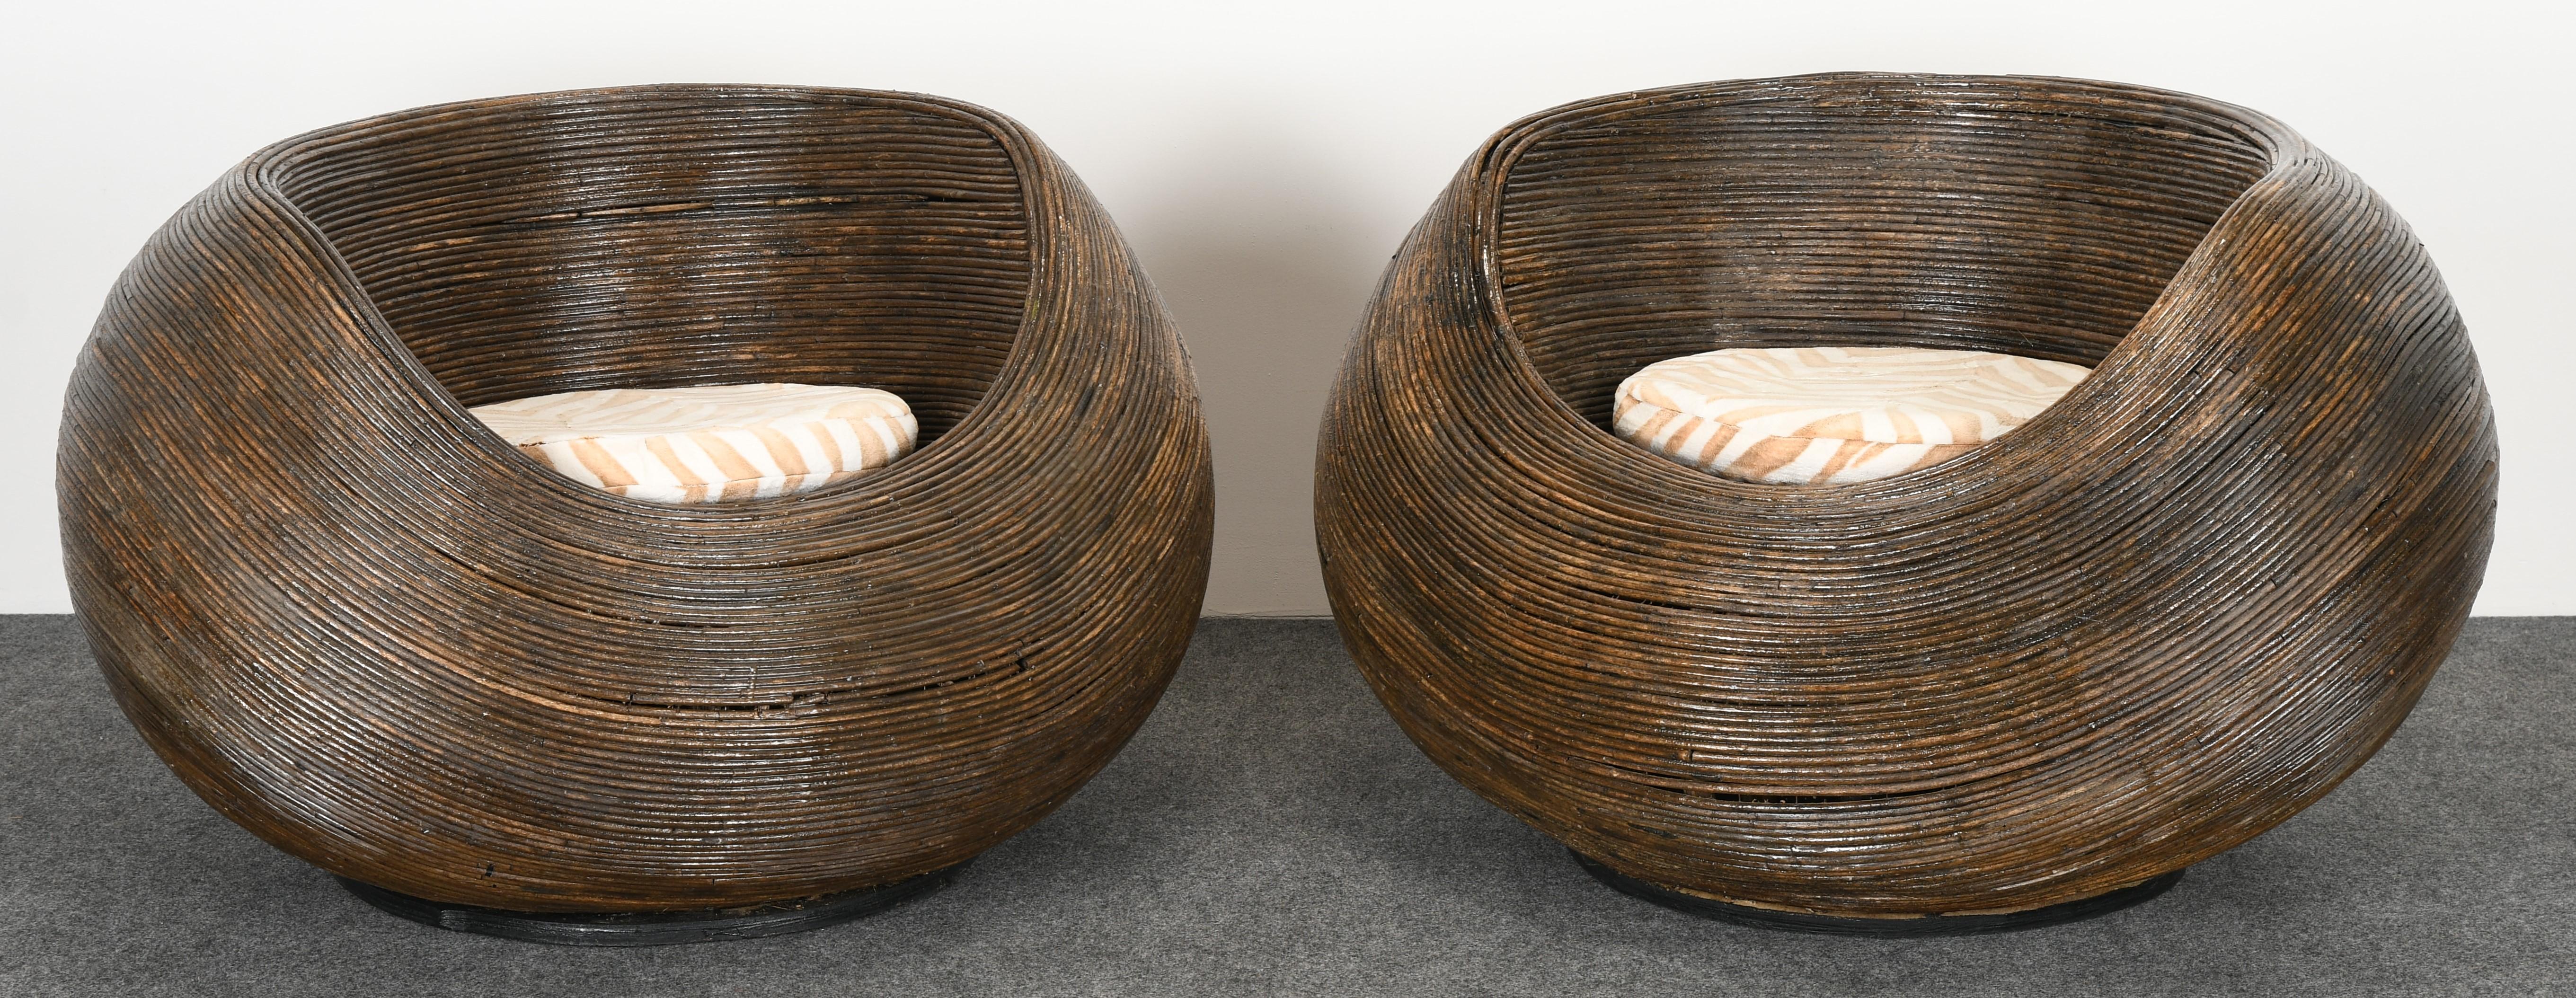 A pair of rattan pod lounge chairs. These chairs have great style and we believe they are vintage but are unsure of age. Some damage to rattan, as shown in images, which may need restoration.

Dimensions: 25